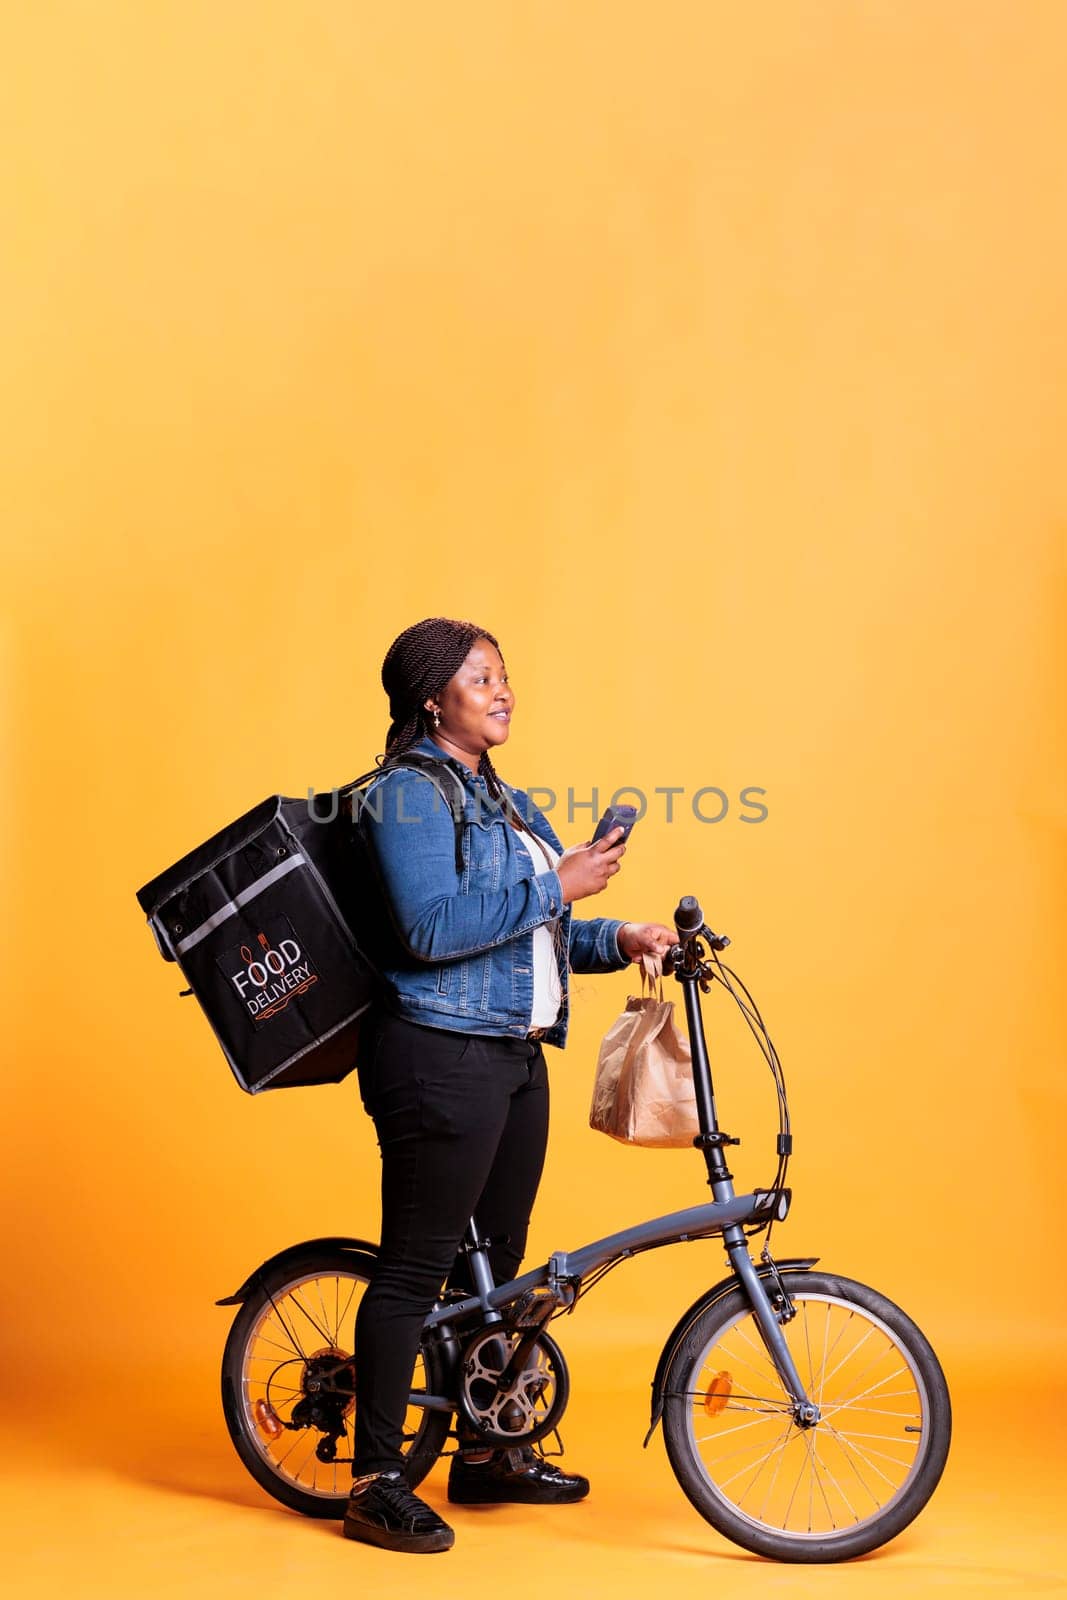 Deliverywoman holding smartphone checking client adreess on fast food app before start delivering lunch orders. Restaurant employee carrying takeout backpack while riding bike as transportation